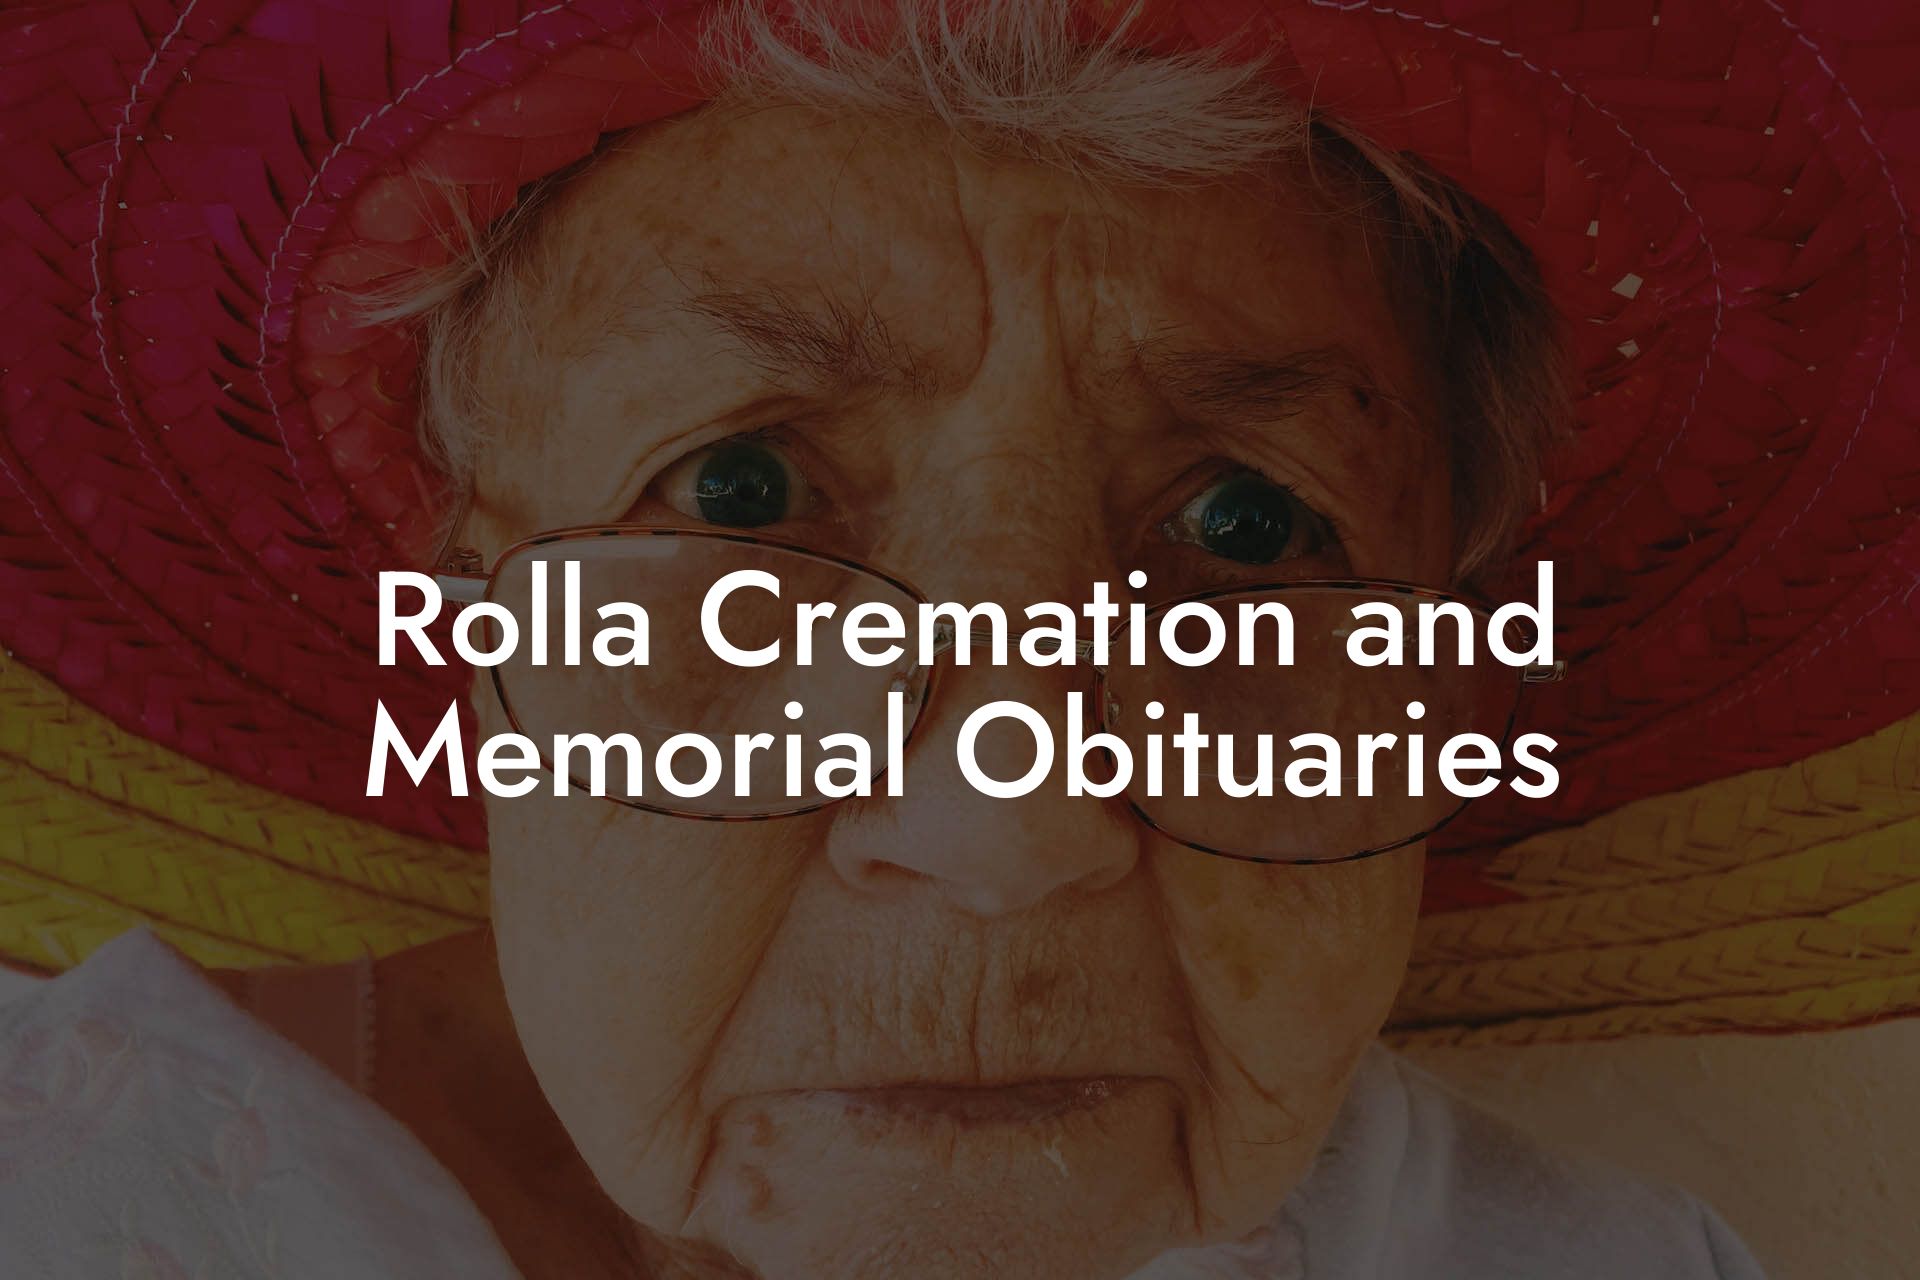 Rolla Cremation and Memorial Obituaries